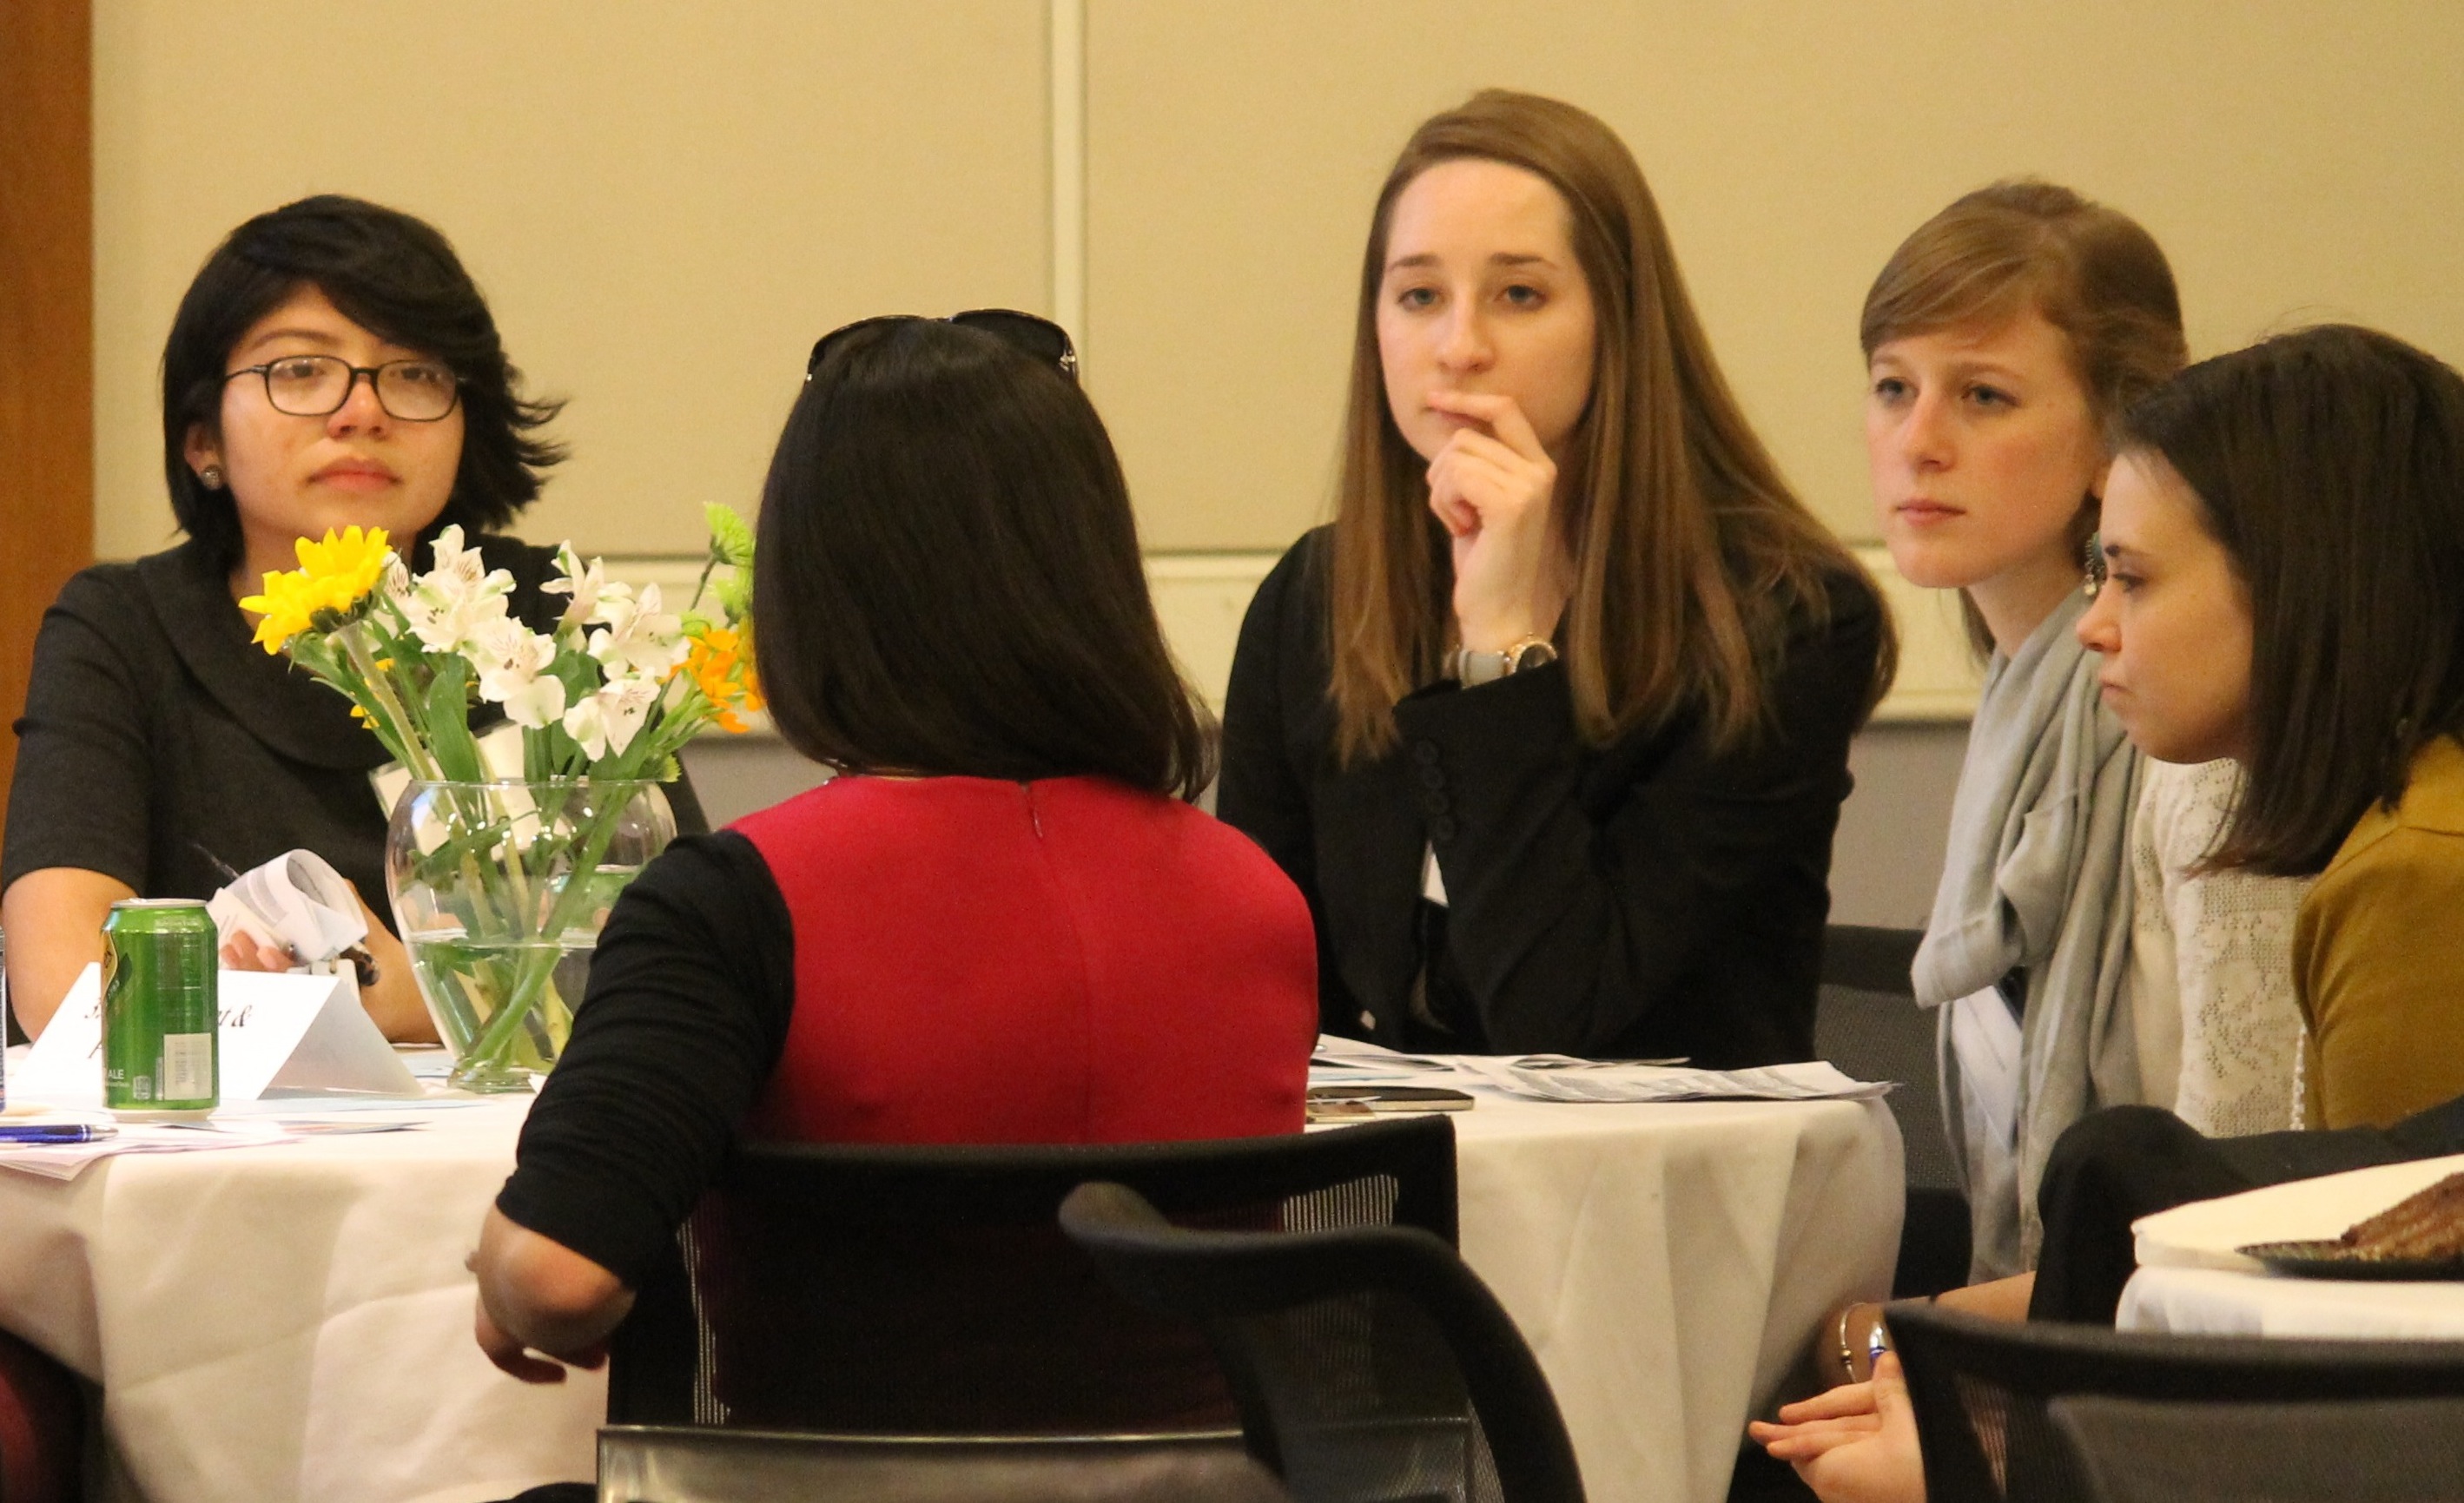 Students Marcela Jiminez, Grace Hastings, Jenny Withrow, Alison Barnett paying rapt attention to an alumna (Amelia Cordischi)